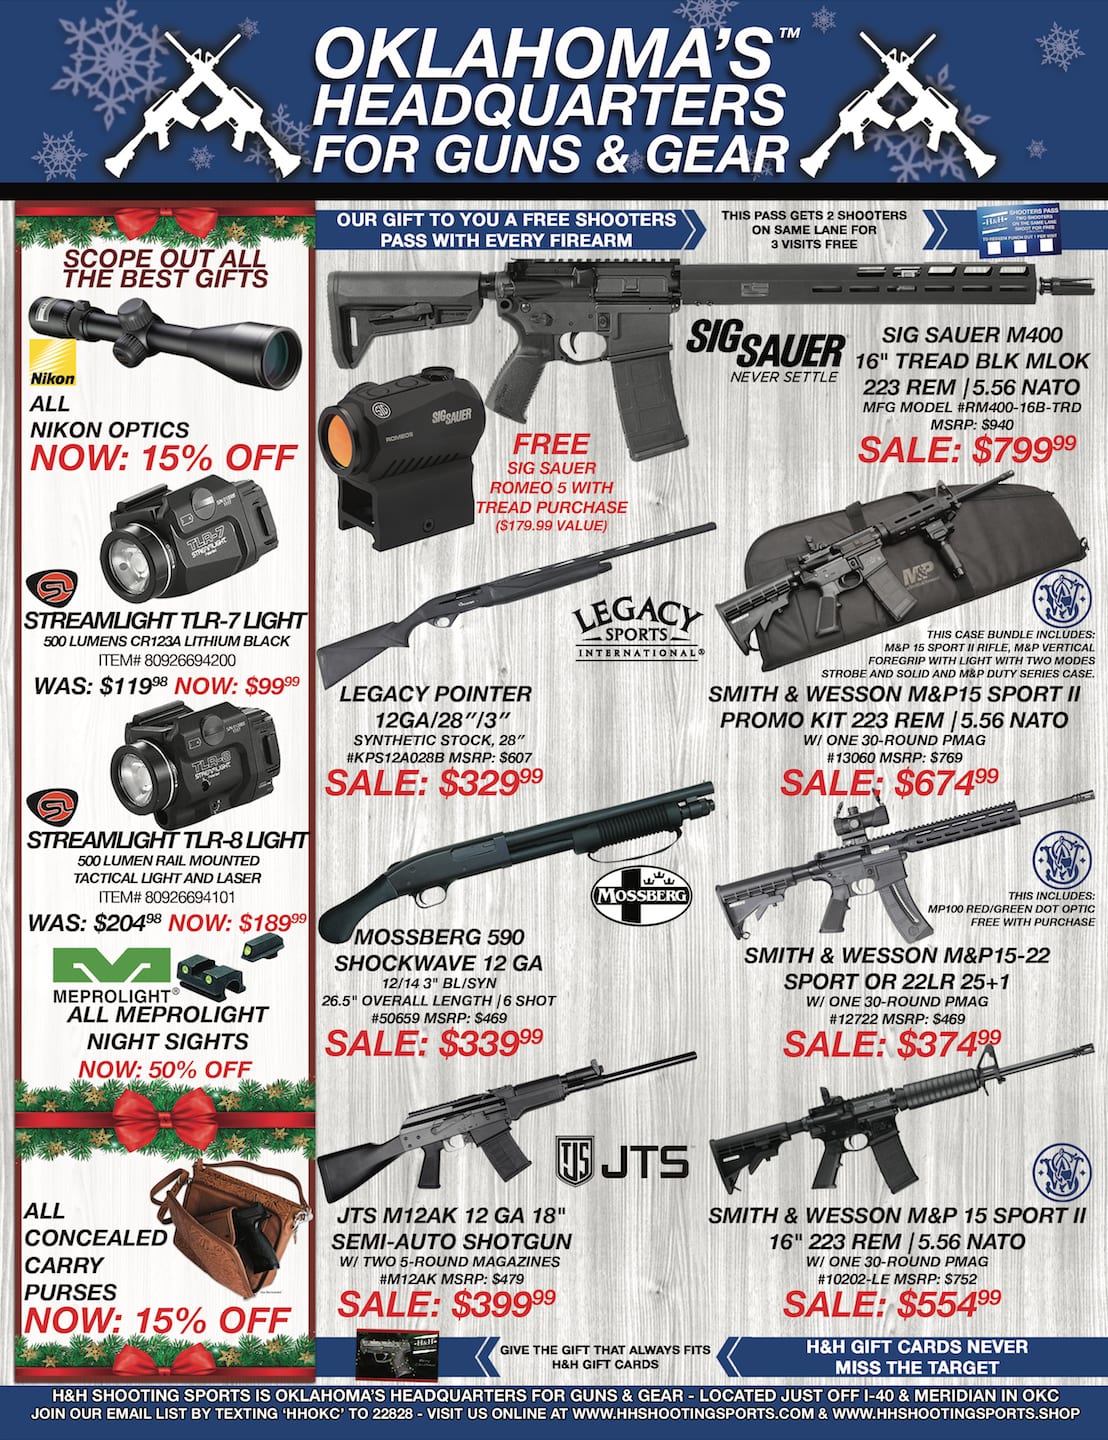 Scope out all the best gifts from H&H Shooting sports in Oklahoma's City 